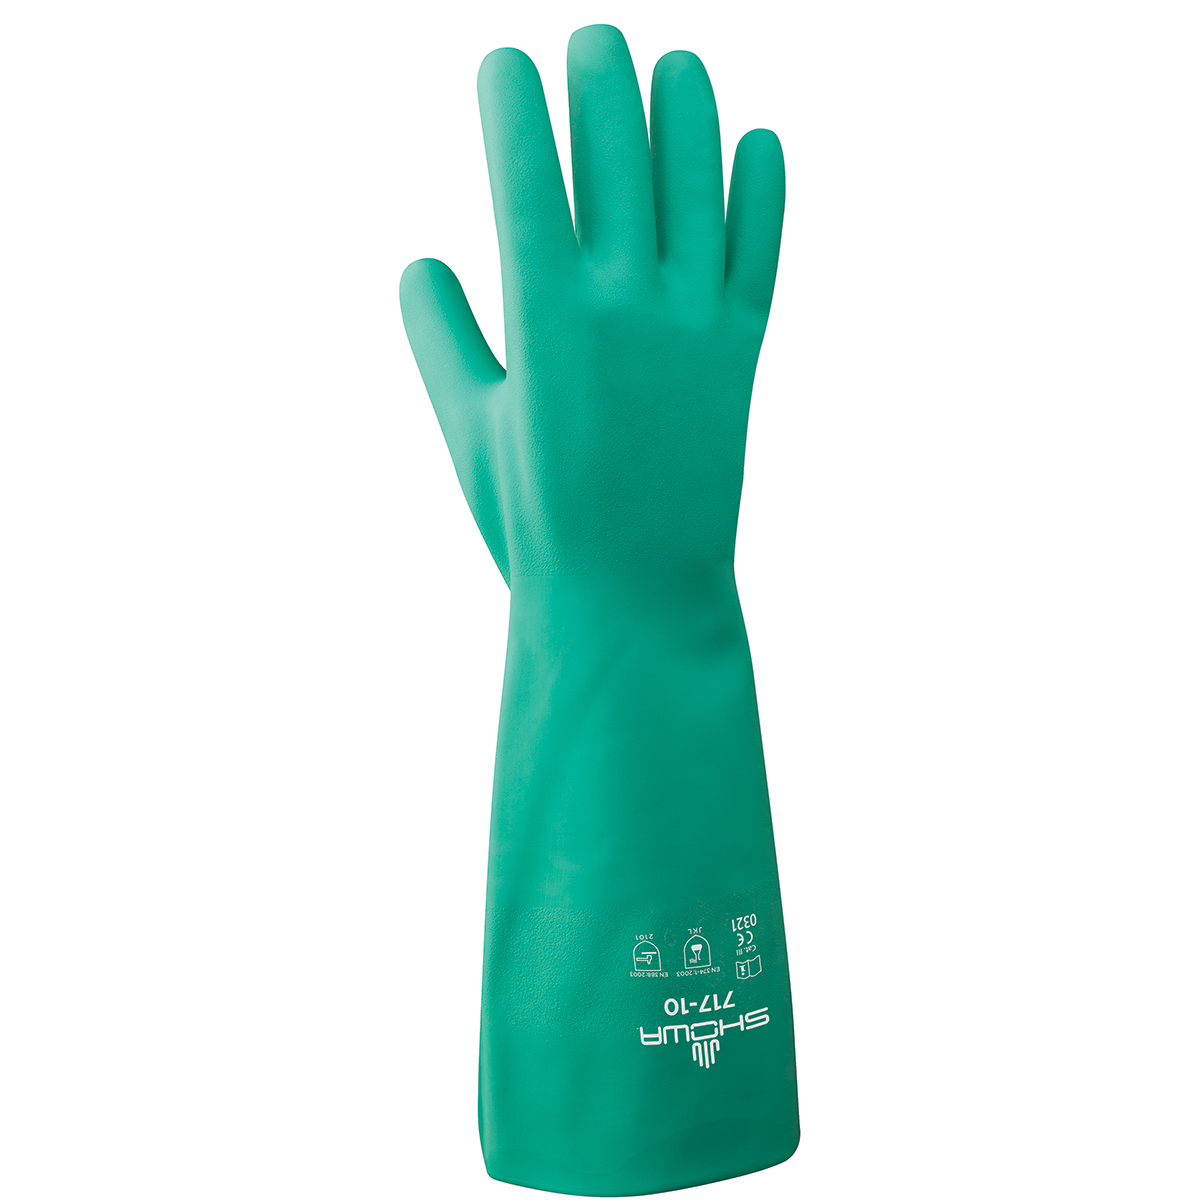 Chemical resistant unsupported nitrile, 13", 11-mil, light green, bisque finish, unlined, small